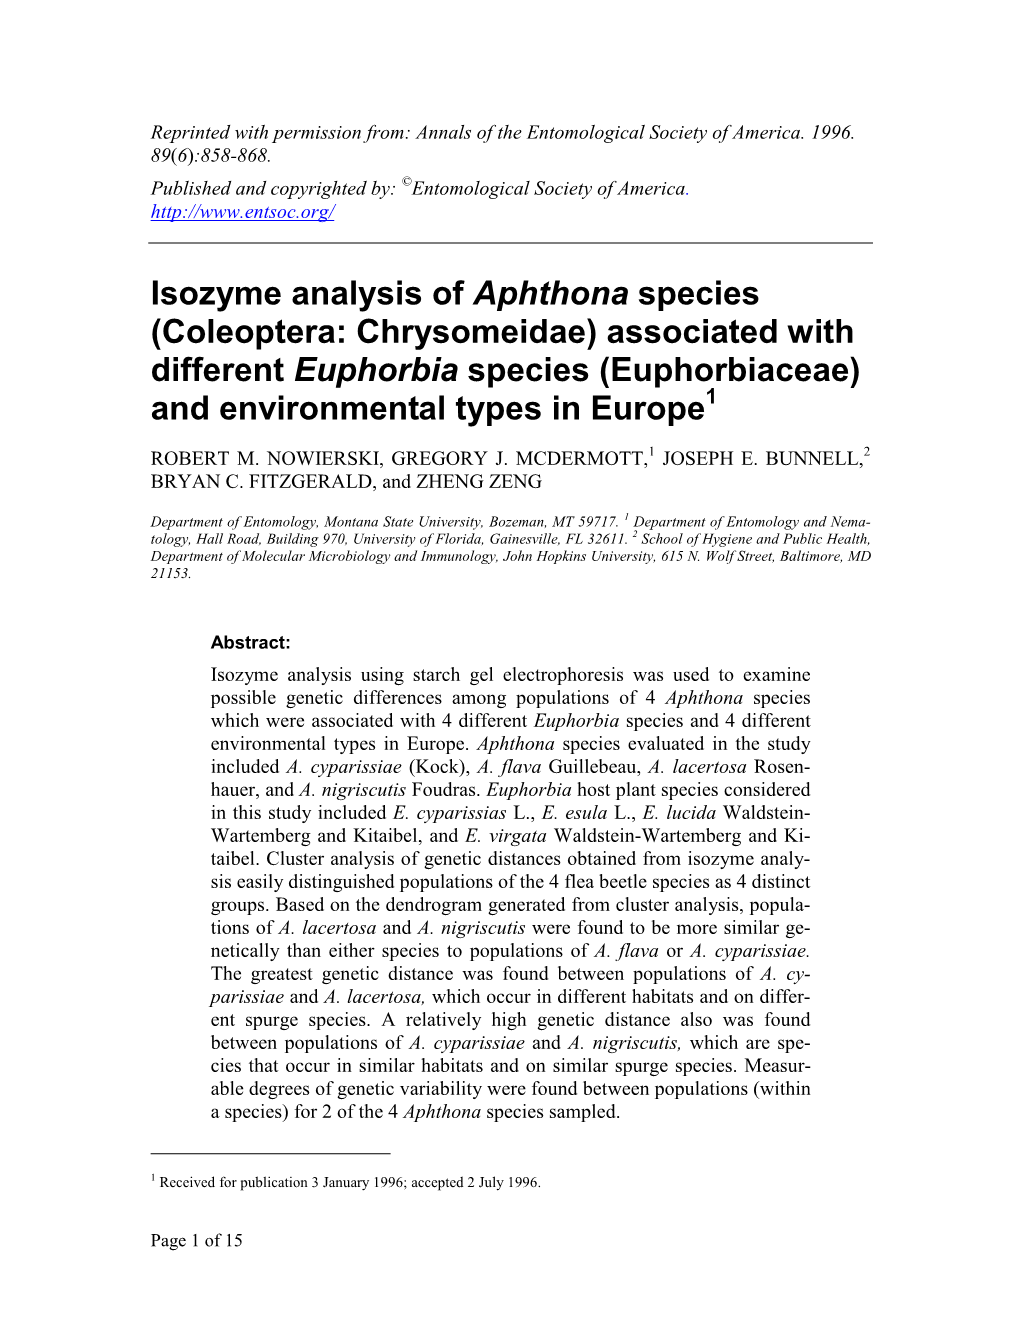 Isozyme Analysis of Aphthona Species (Coleoptera: Chrysomeidae) Associated with Different Euphorbia Species (Euphorbiaceae) and Environmental Types in Europe1